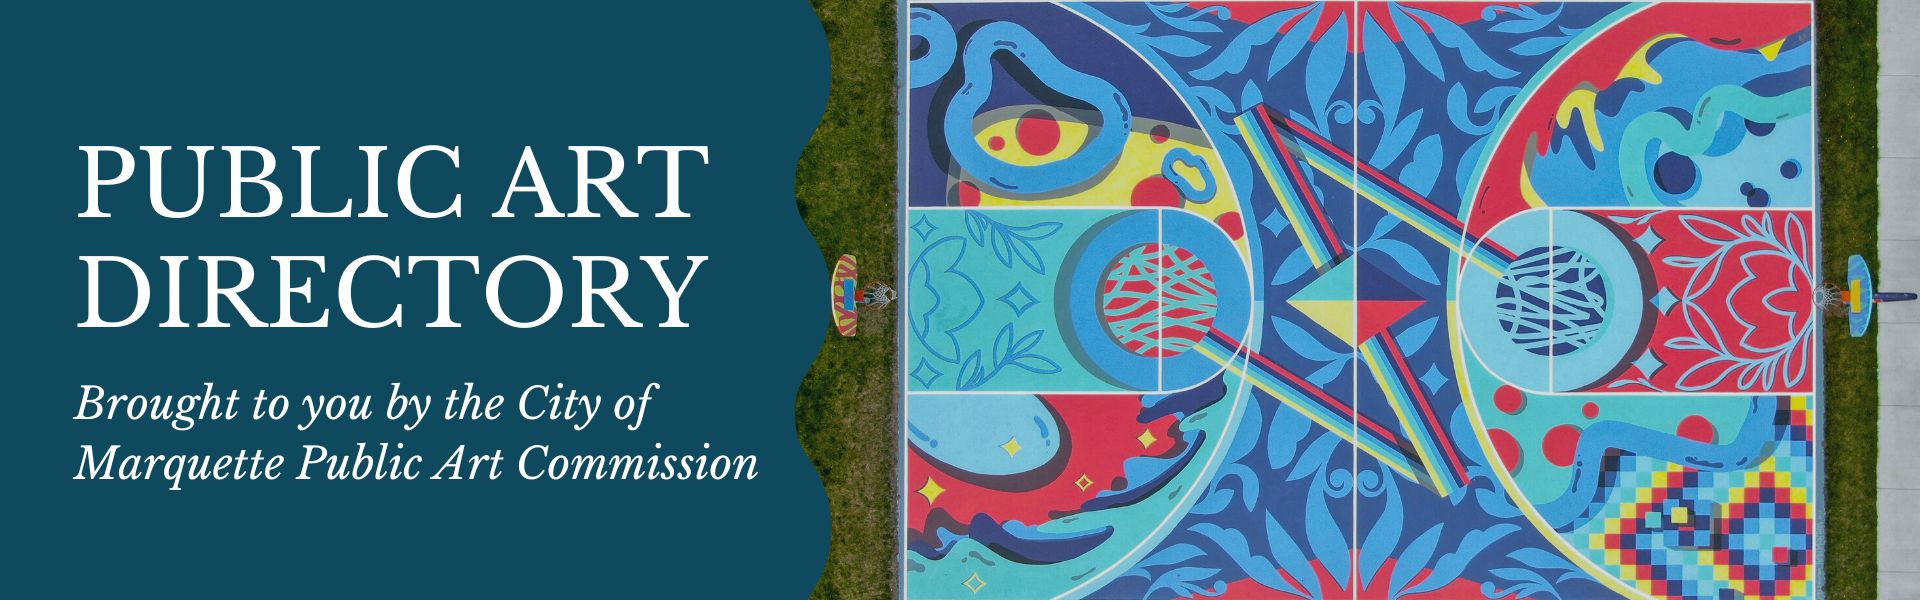 Title: Public Art Directory - photo of a brightly colored geometric Basketball court mural